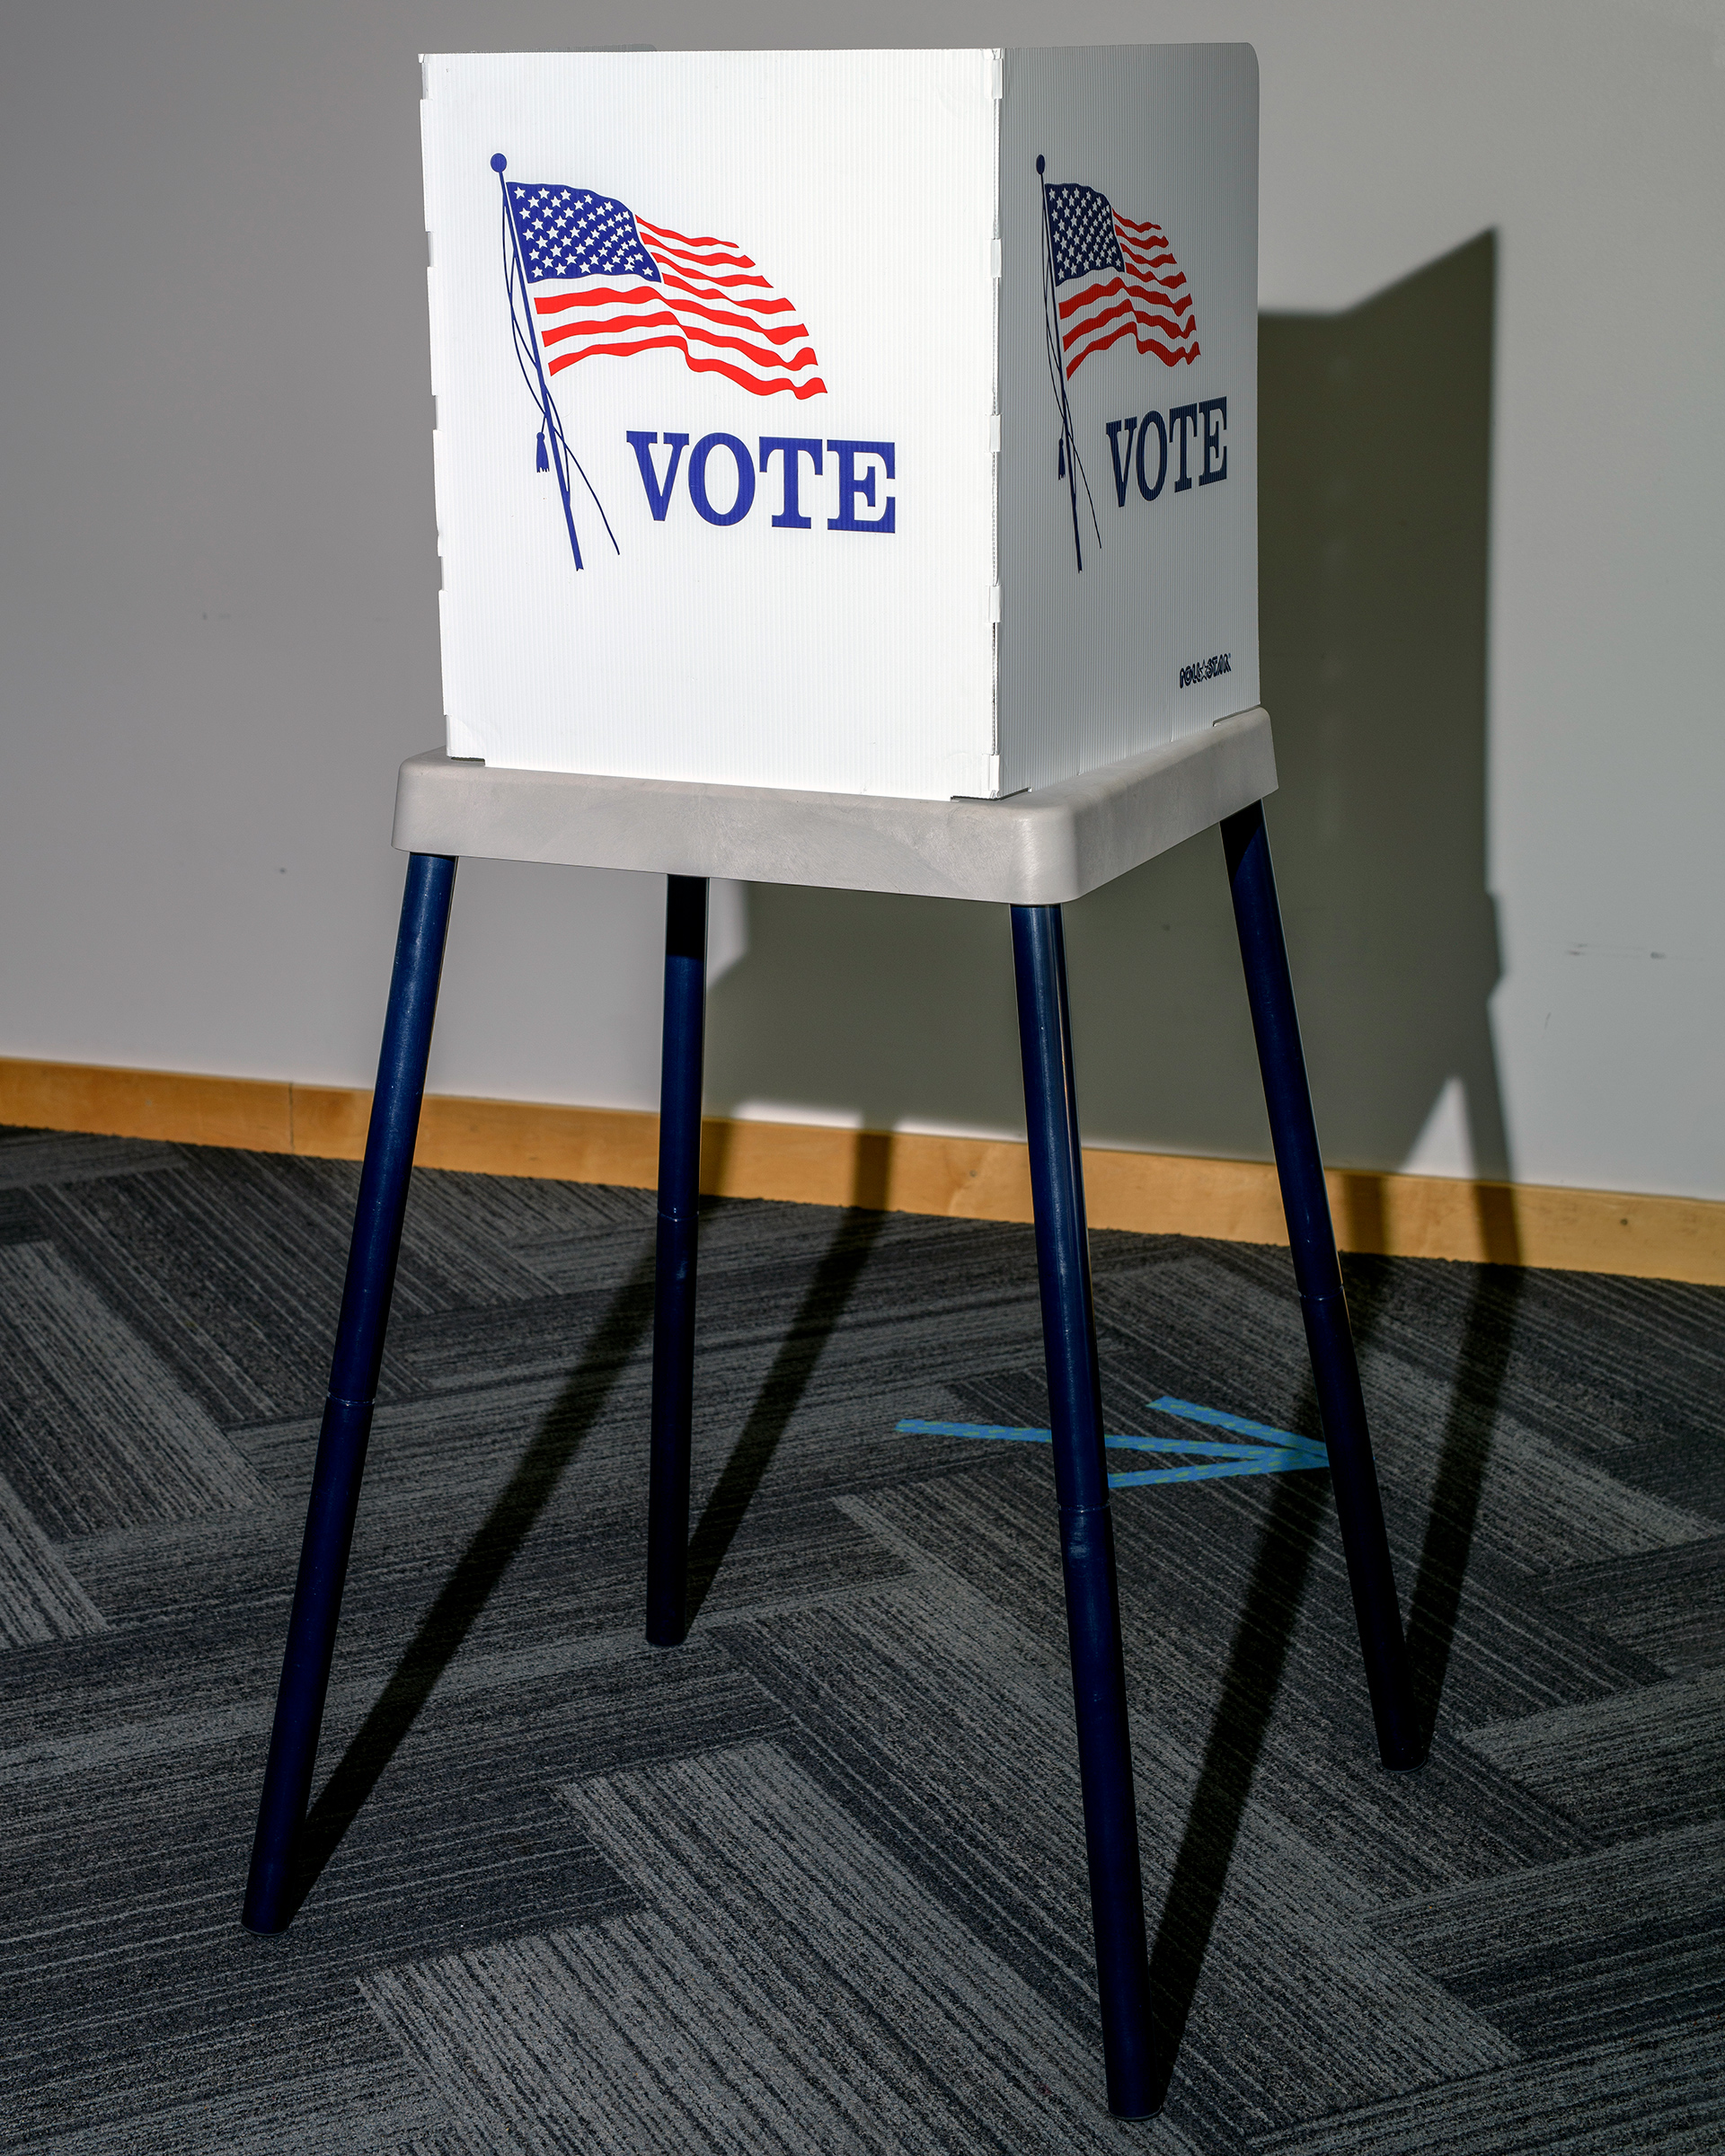 A voting booth is shown set up at the Ames Public Library on Primary Election Day on June 7, 2022 in Ames, Iowa.